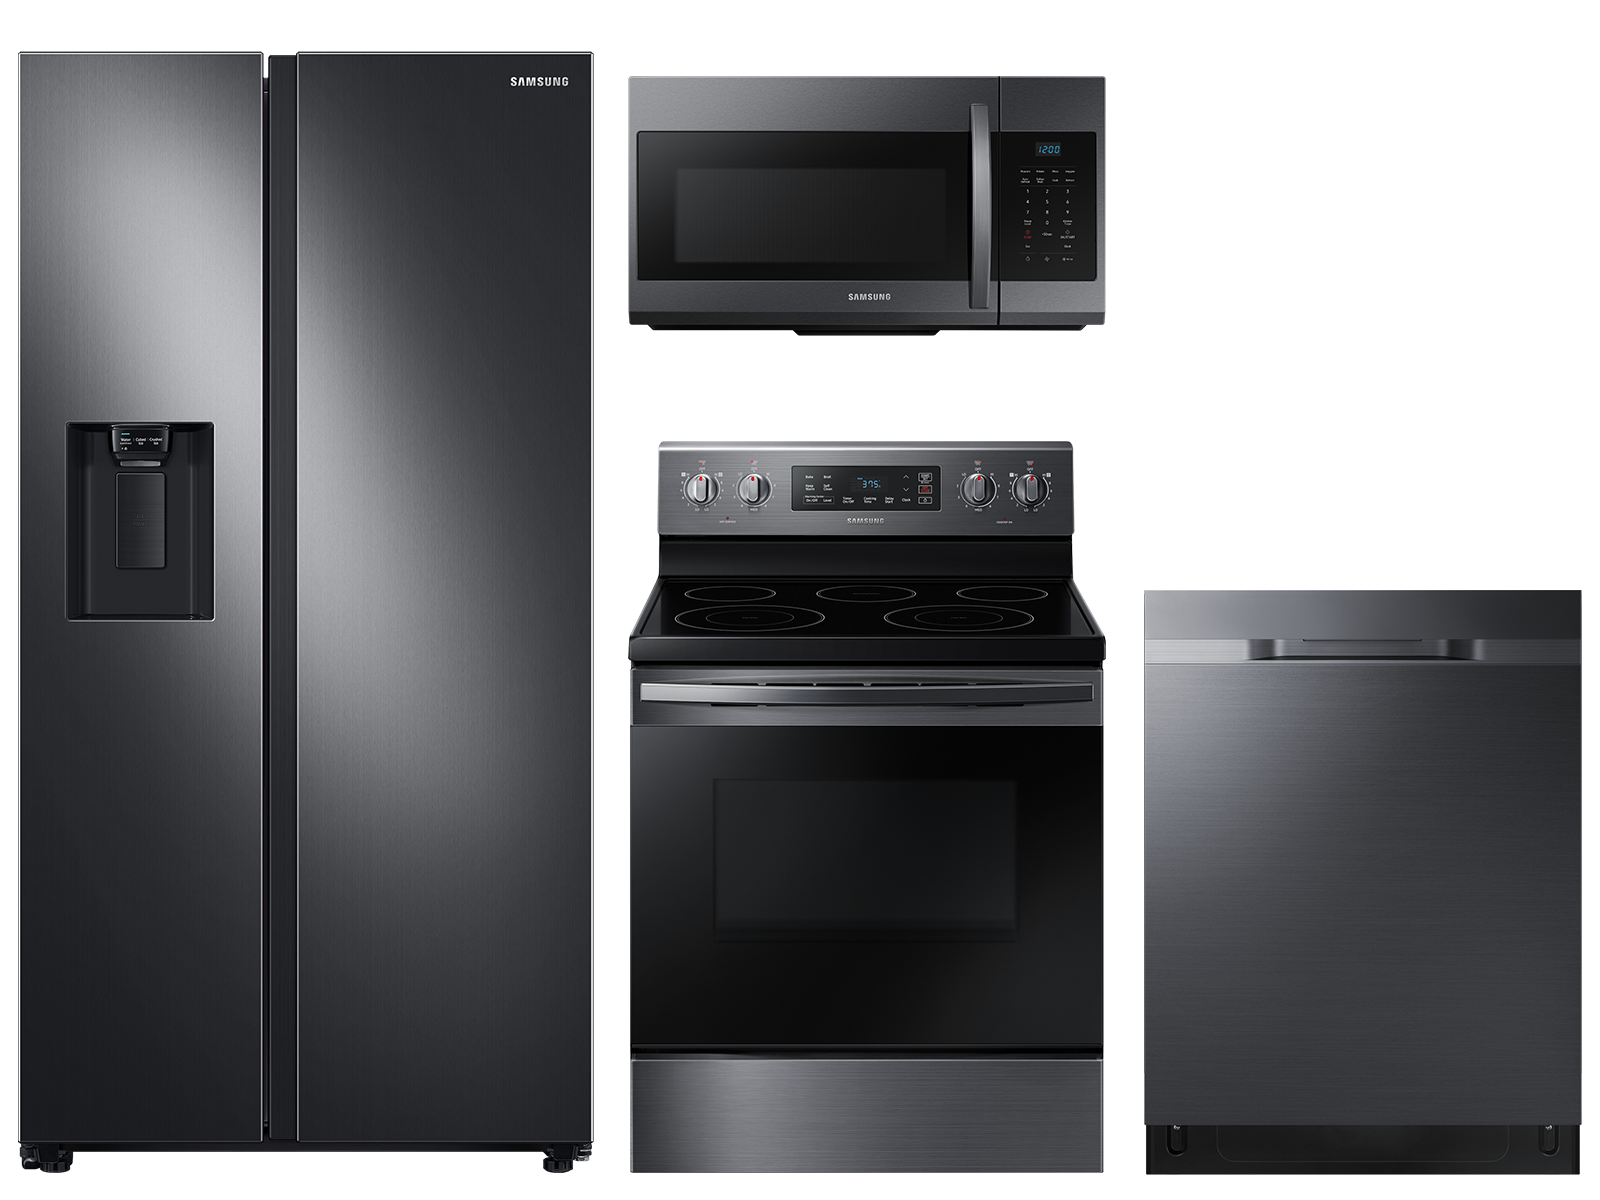 Large capacity Side-by-Side refrigerator & electric range package in black stainless